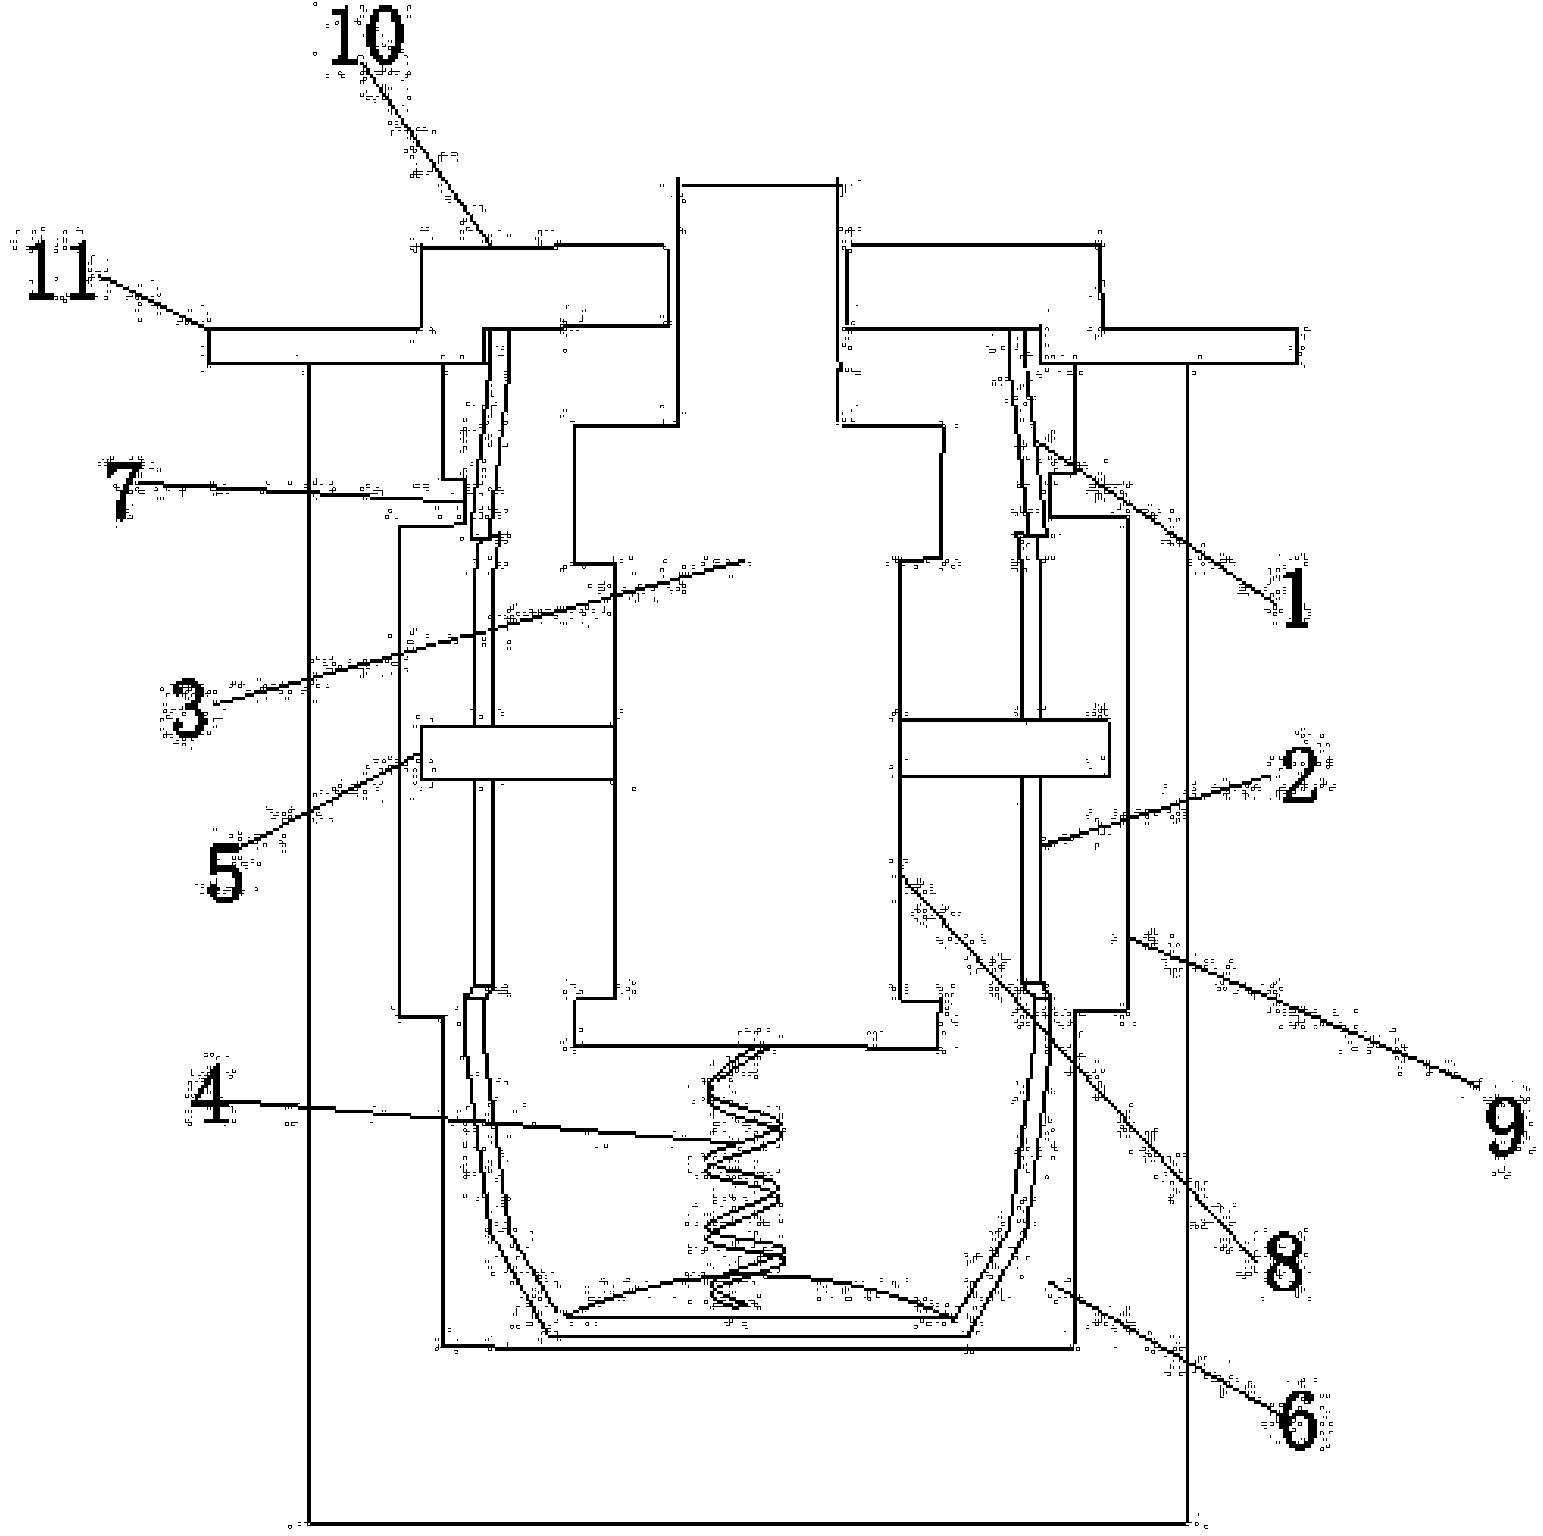 Contact element pair structure for electric connector